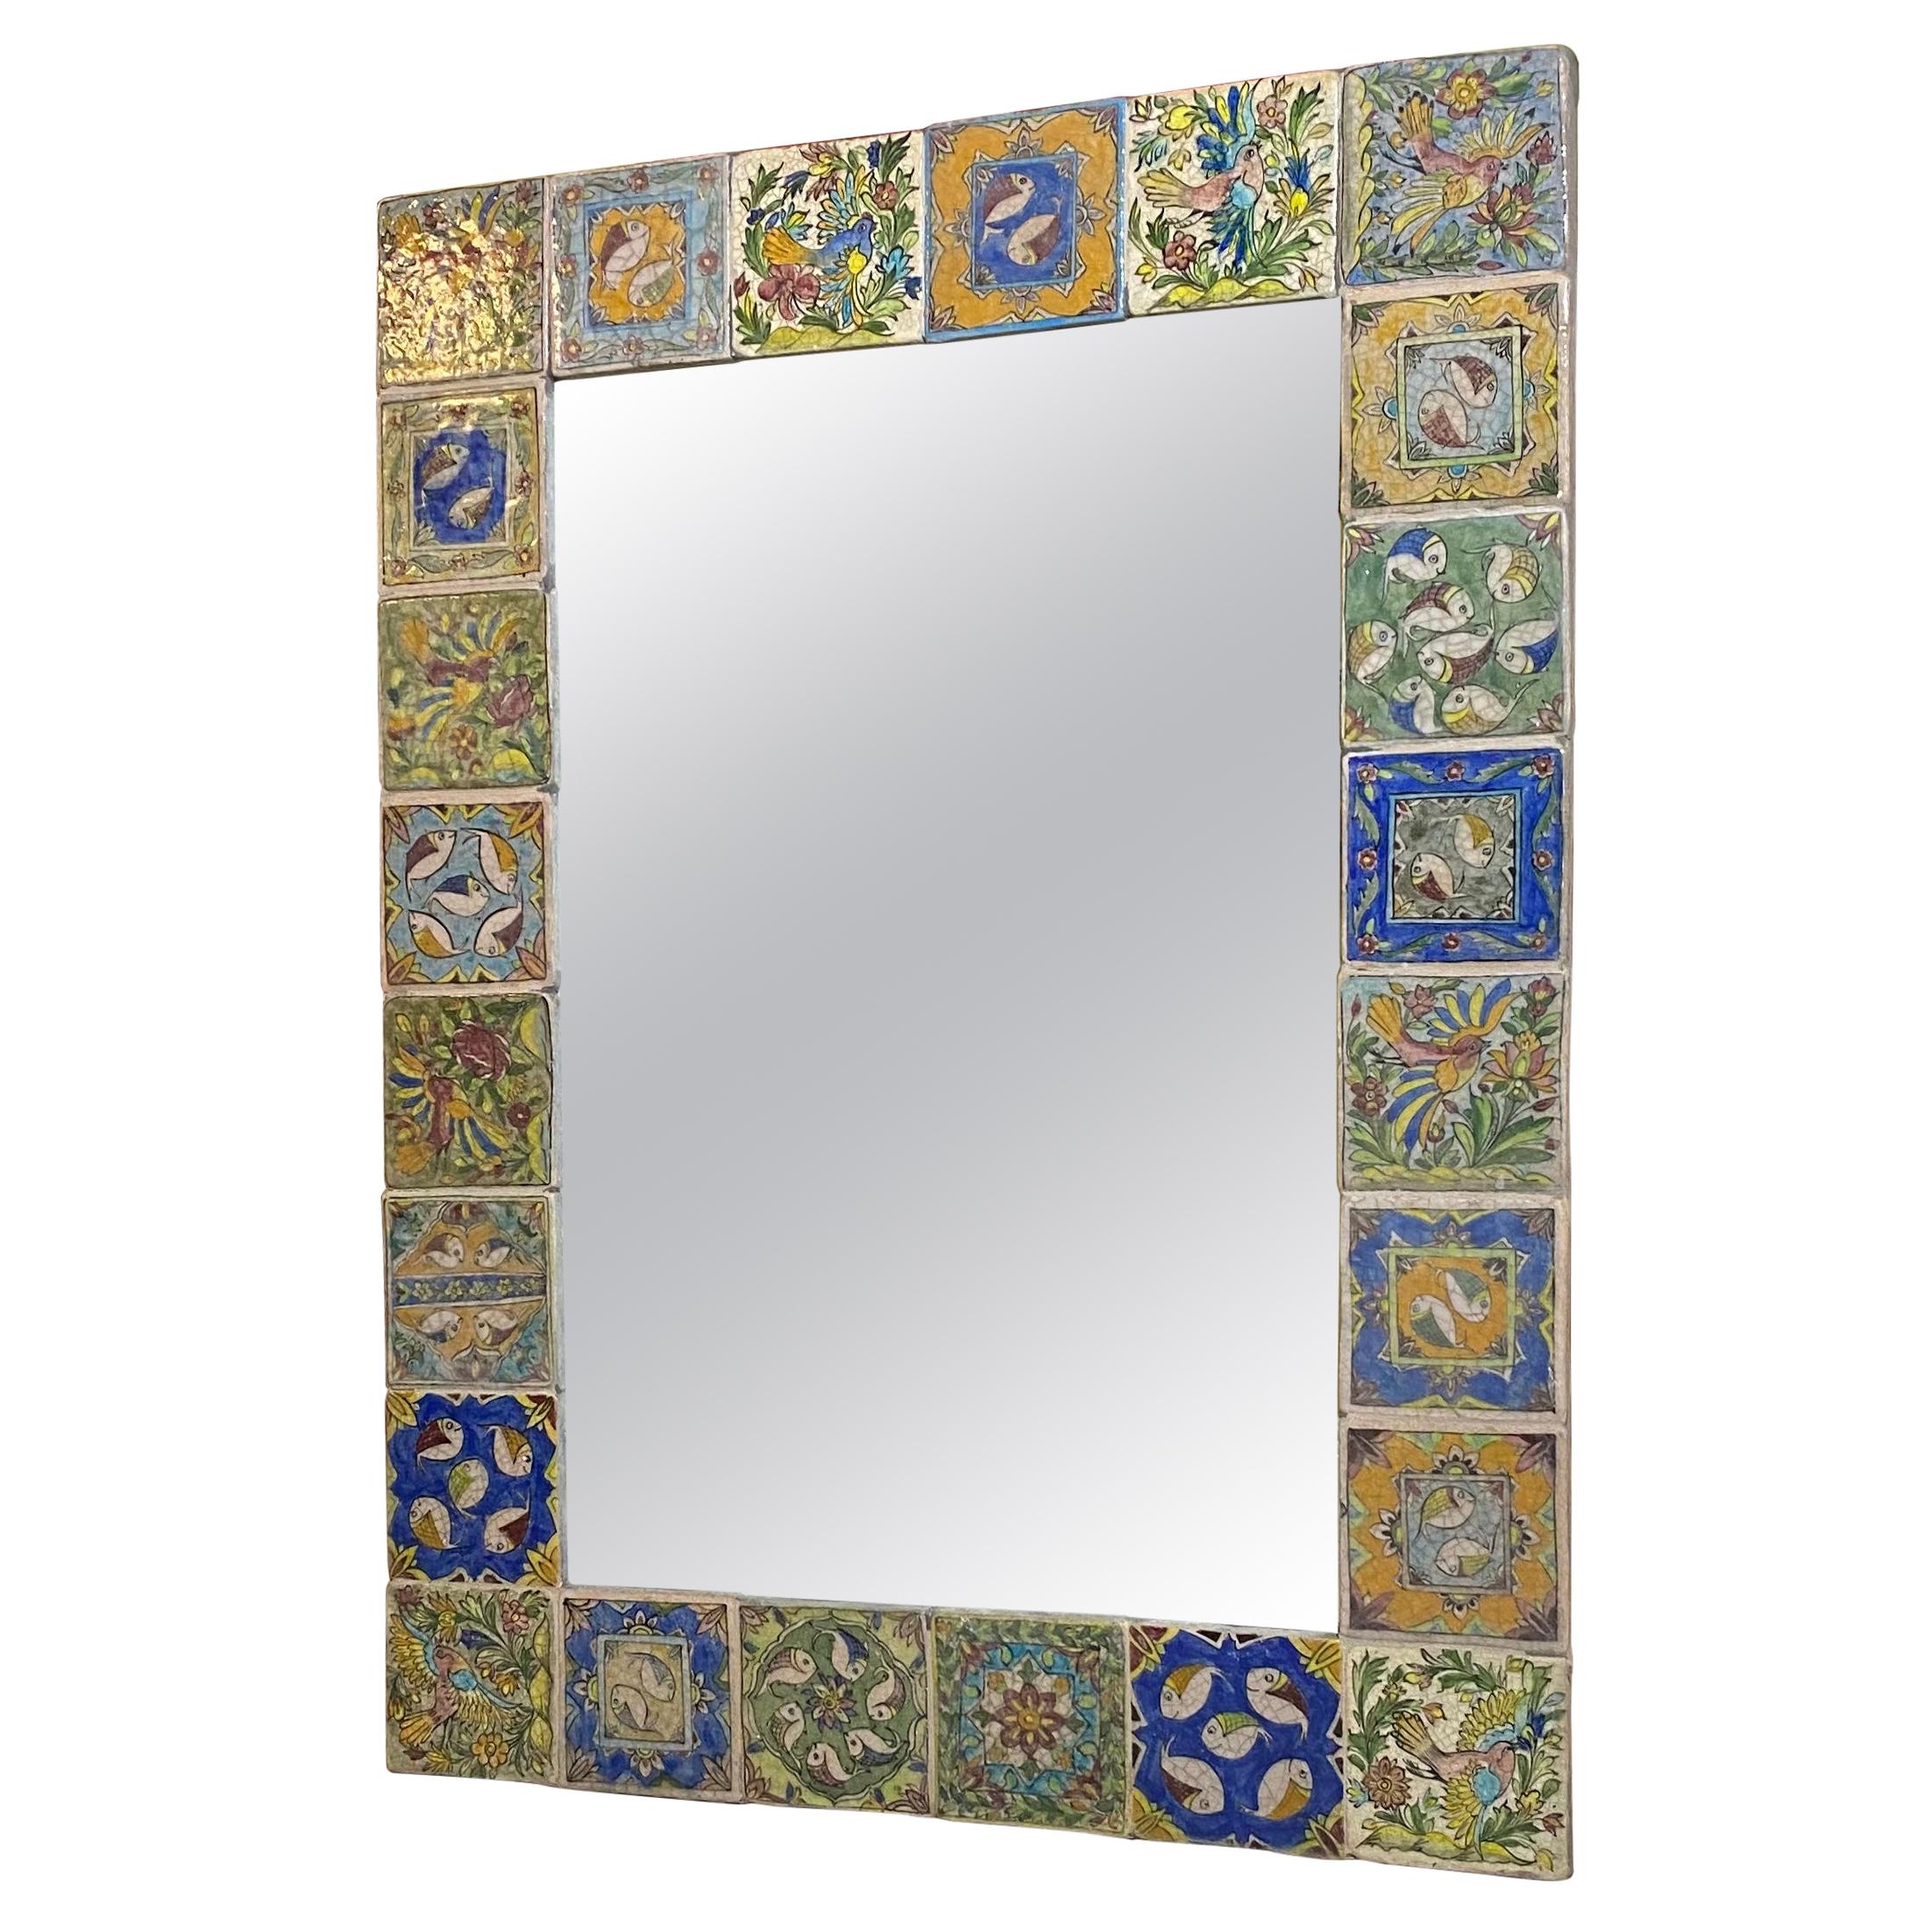 One of a Kind Large Hand Painted Ceramic Tile Mirror For Sale